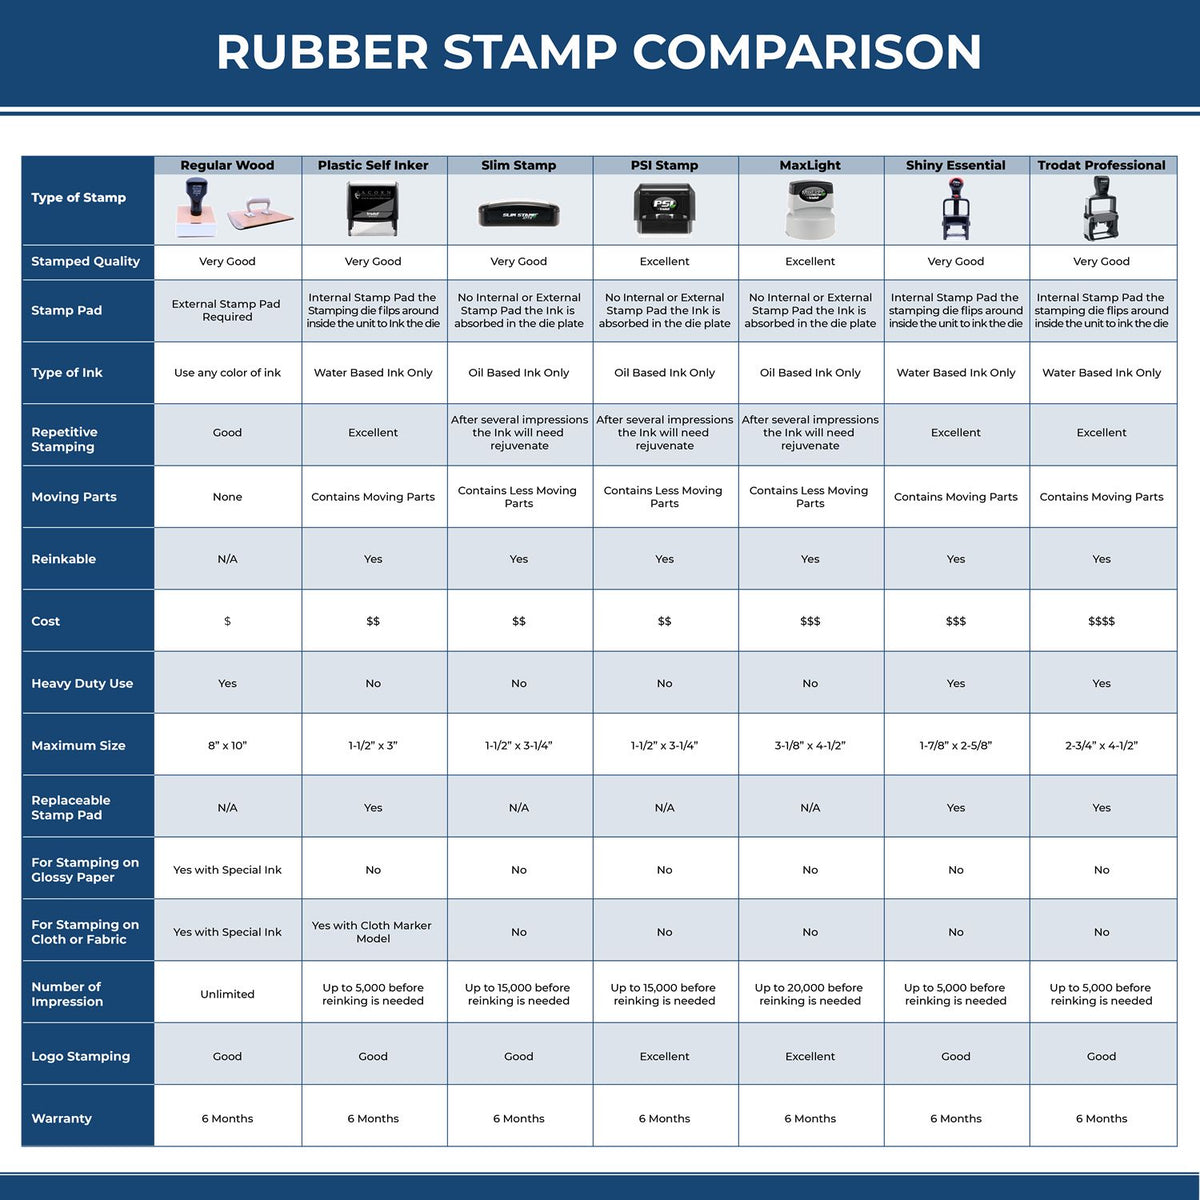 Large Lowercase For Deposit Only Rubber Stamp 4929R Rubber Stamp Comparison